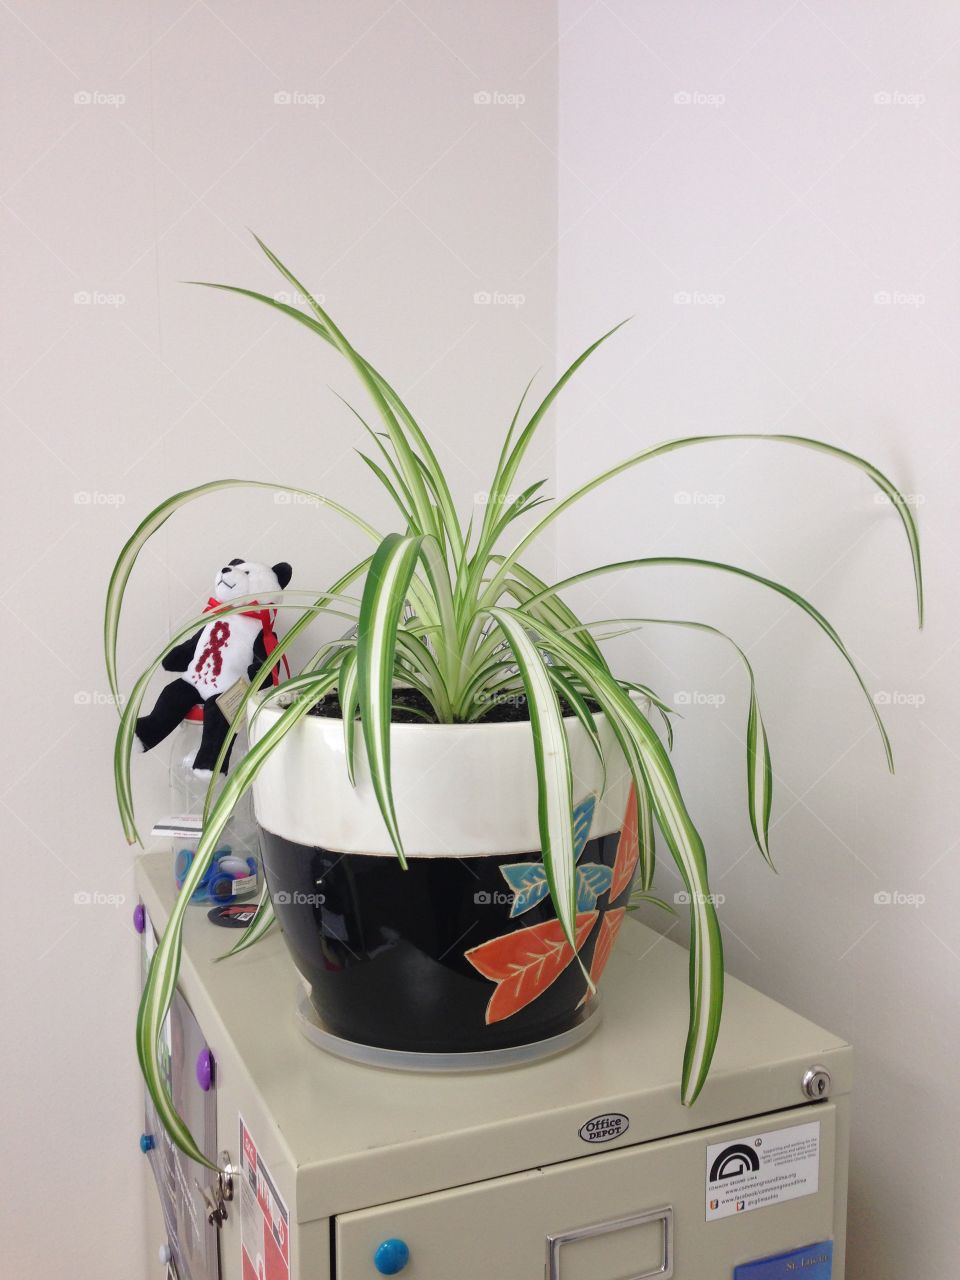 Spider plant at work 